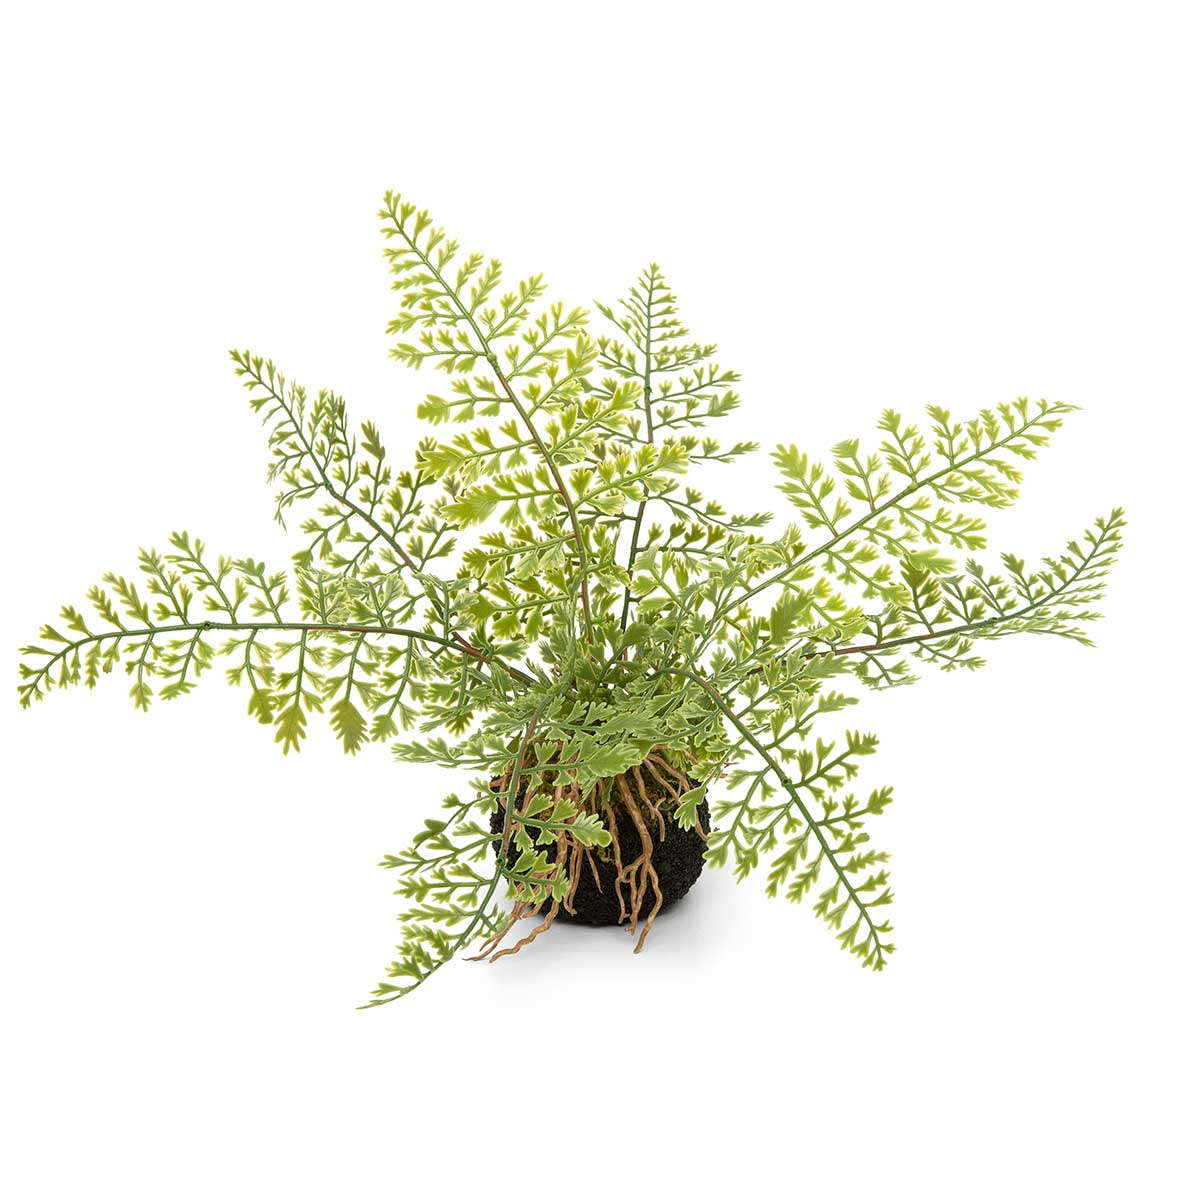 MAIDENHAIR FERN WITH FAUX DIRT, MOSS AND ROOTS 15"X10"